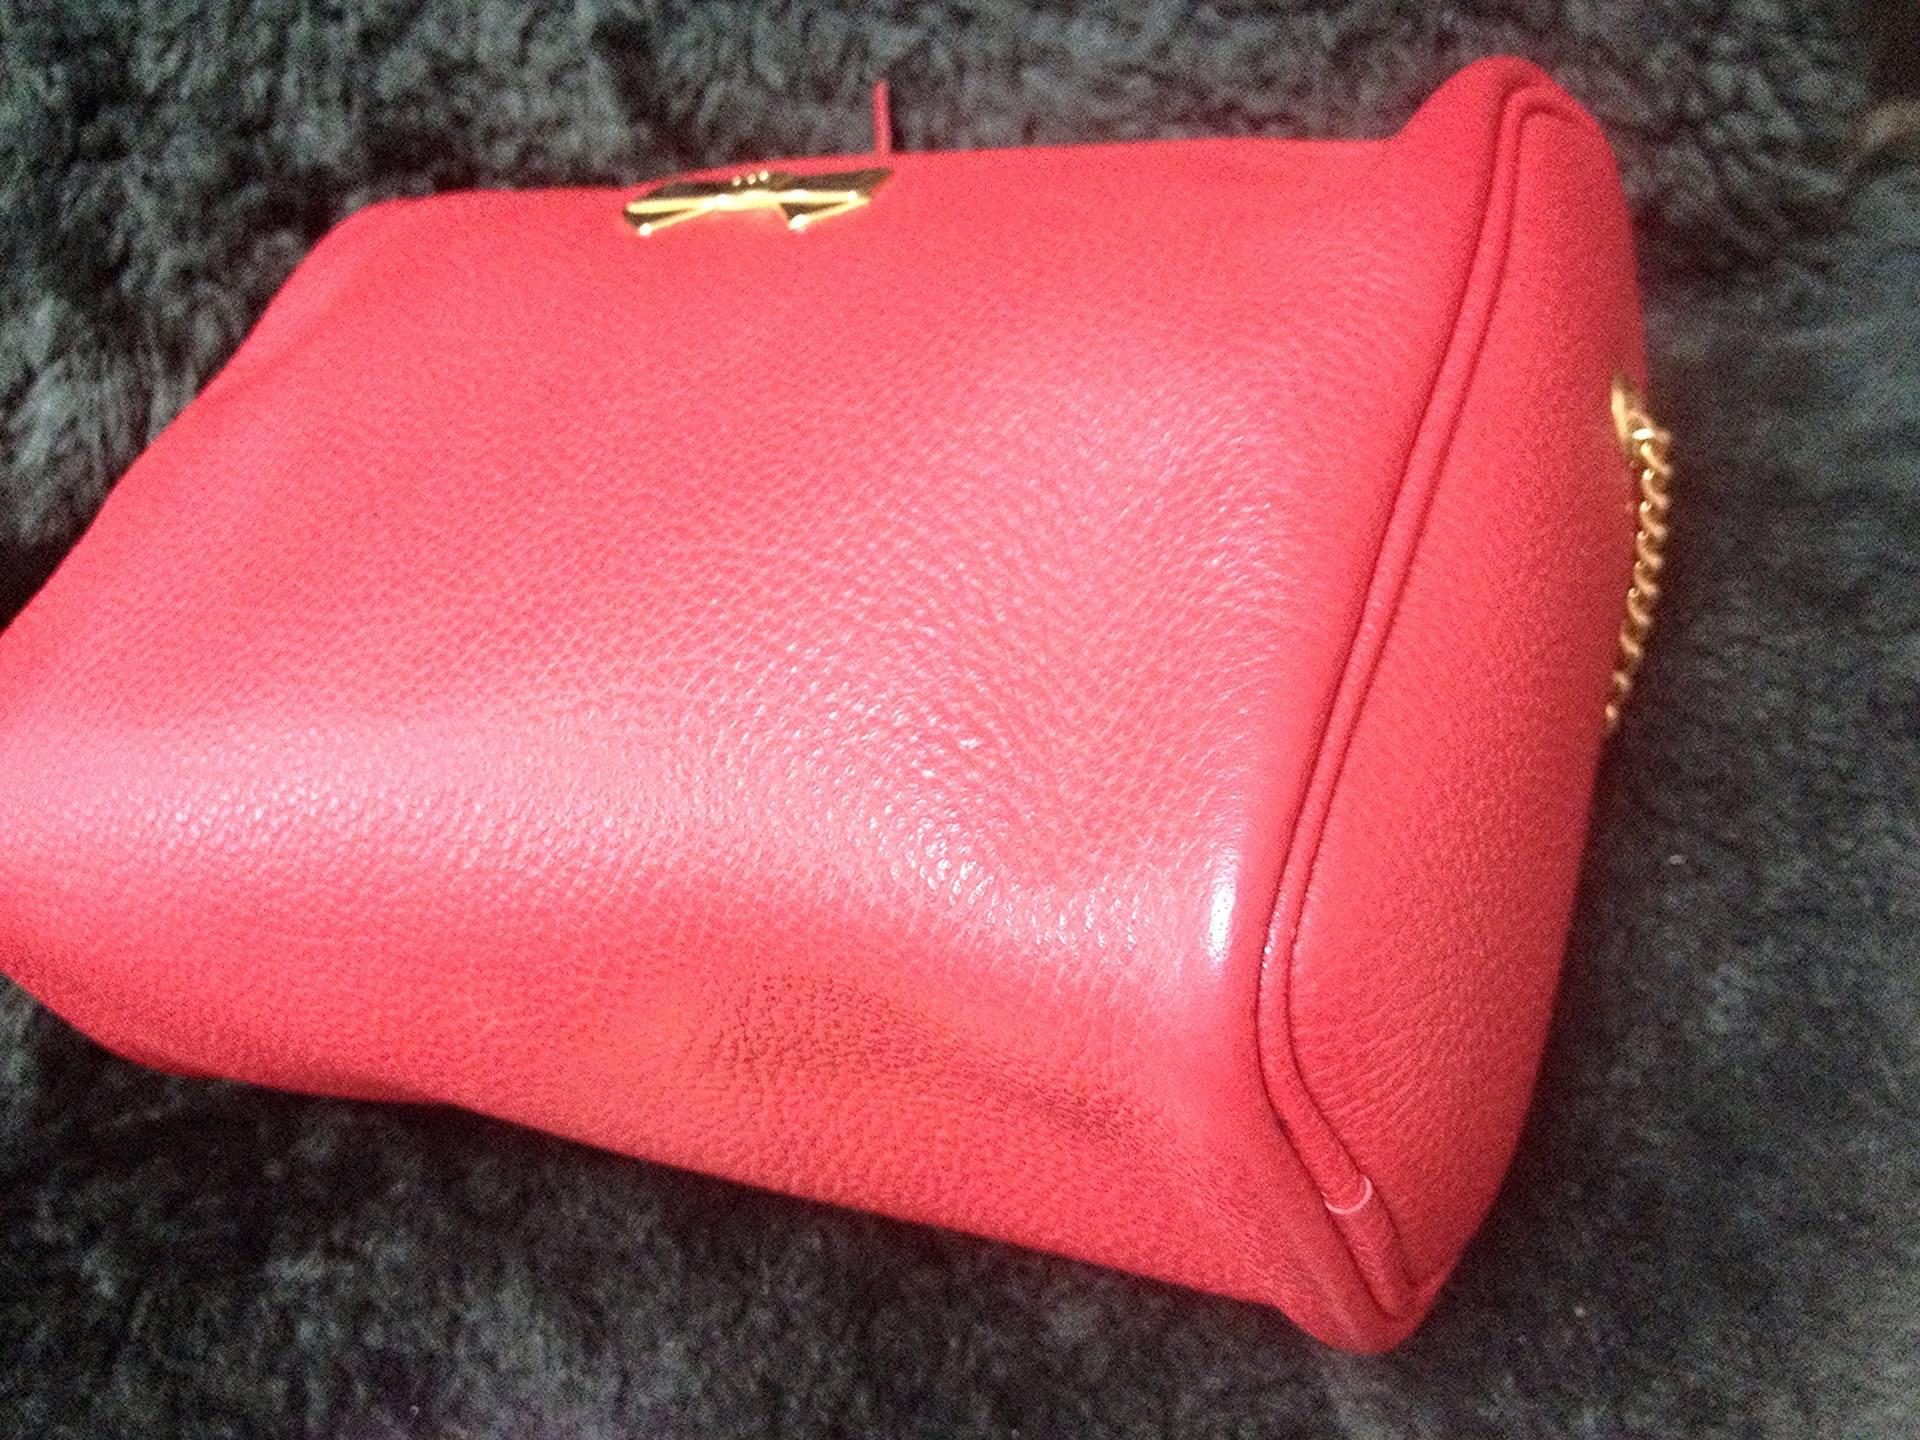 Red Vintage Nina Ricci red leather mini pouch purse with golden chain shoulder strap